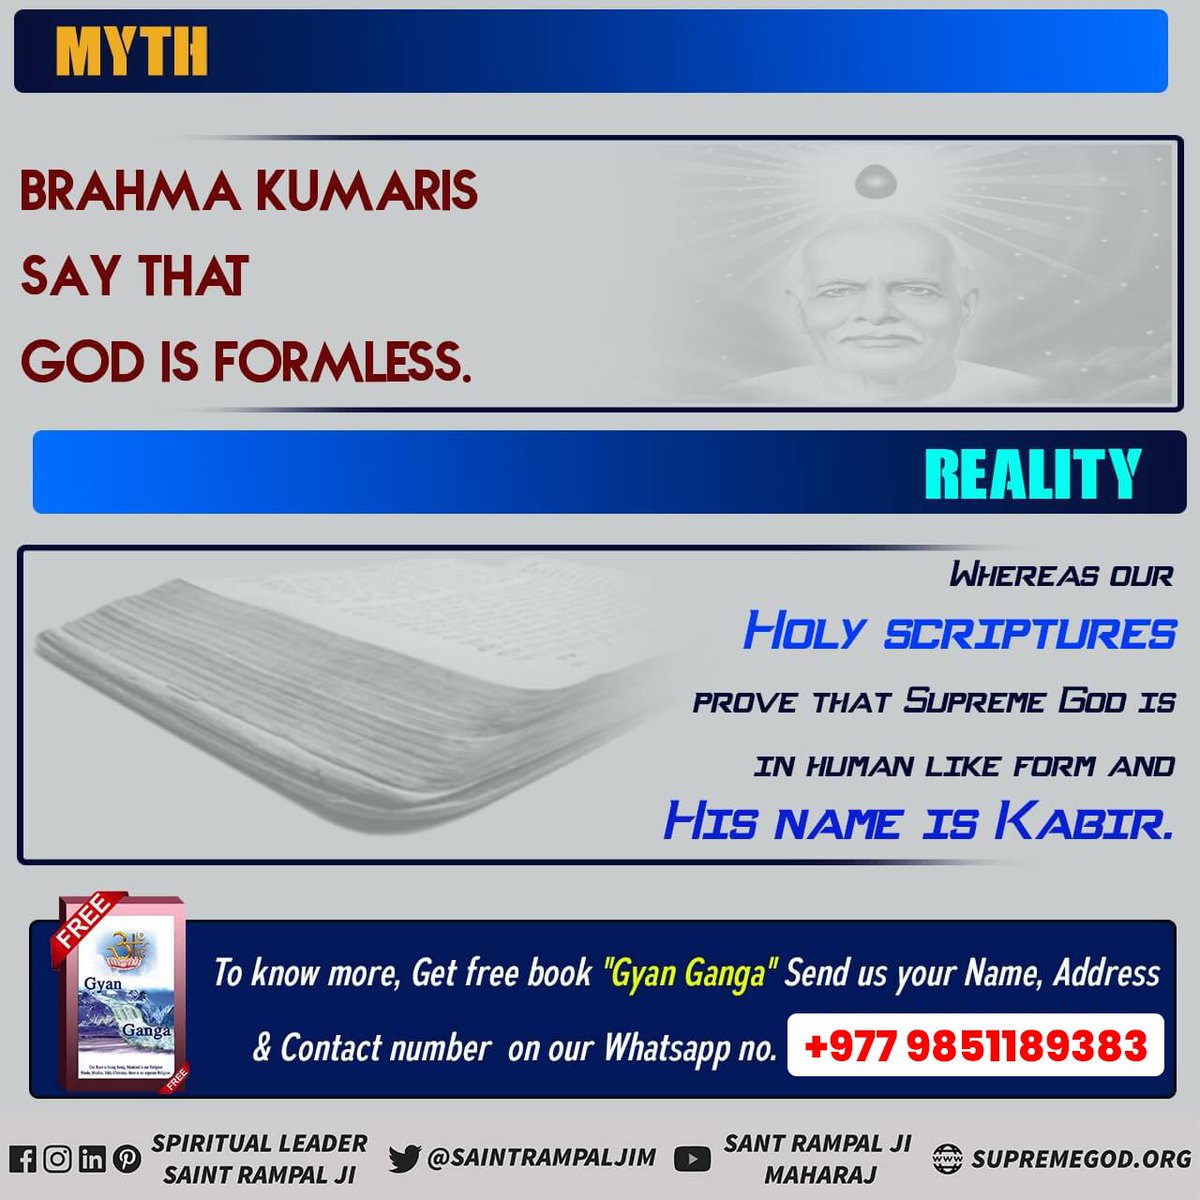 #Reality_Of_BrahmaKumari_Panth The Bhagavad Gita categorizes people who force meditation and practice celibacy as demonic because they are motivated by ego and pride. For true worship knowledge visit Jagat Guru Rampal Ji: True Spiritual Leader & Avatar of the Supreme God .